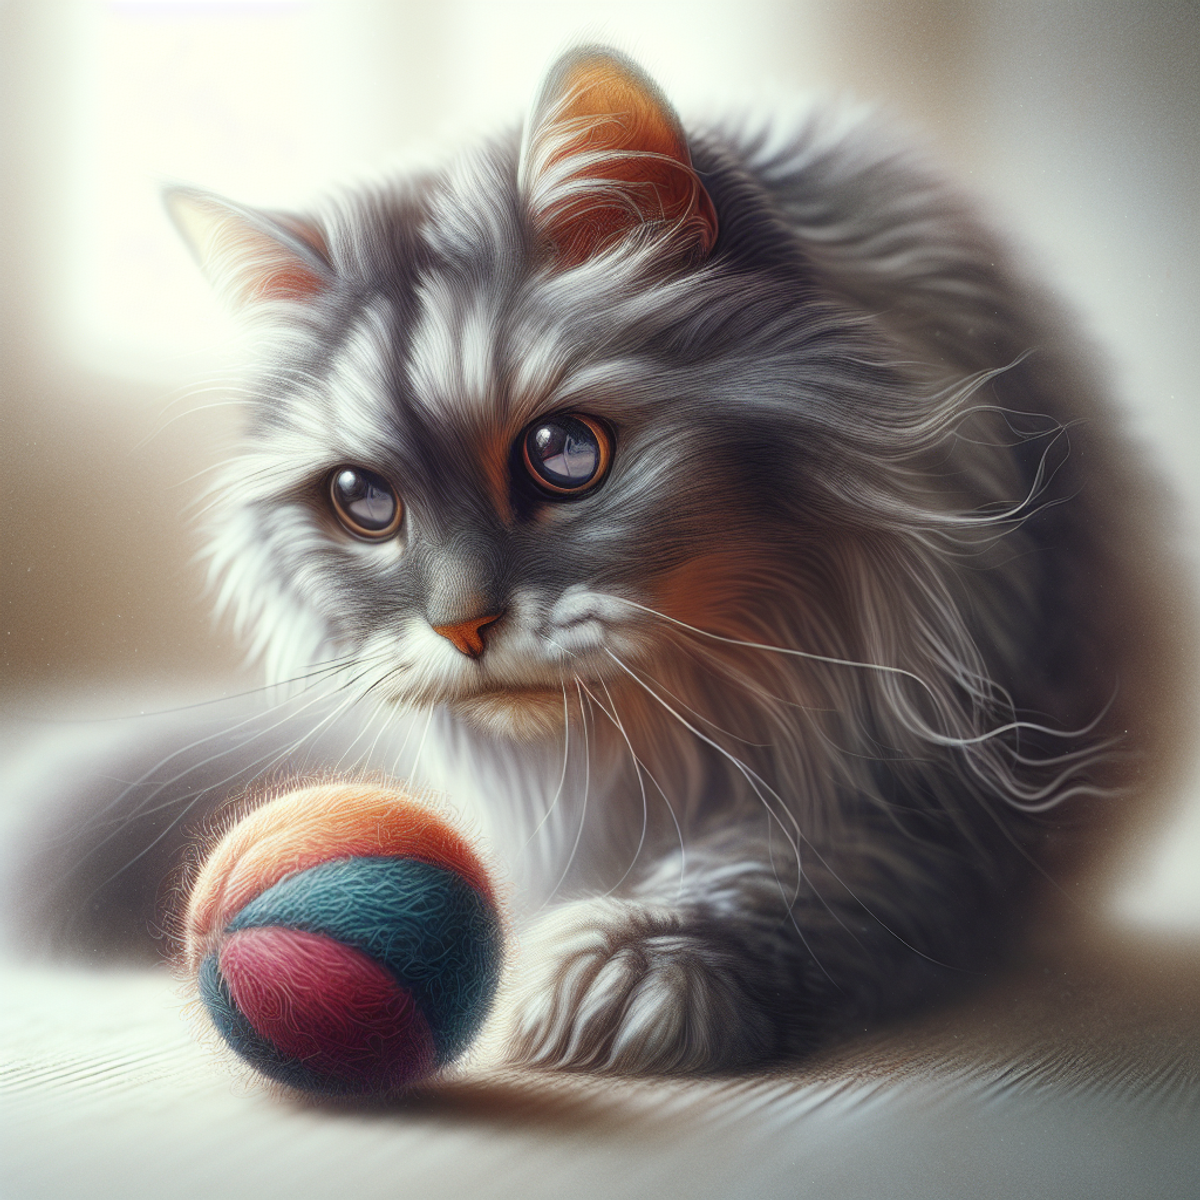 A senior cat with graying fur playing with a colorful ball toy.